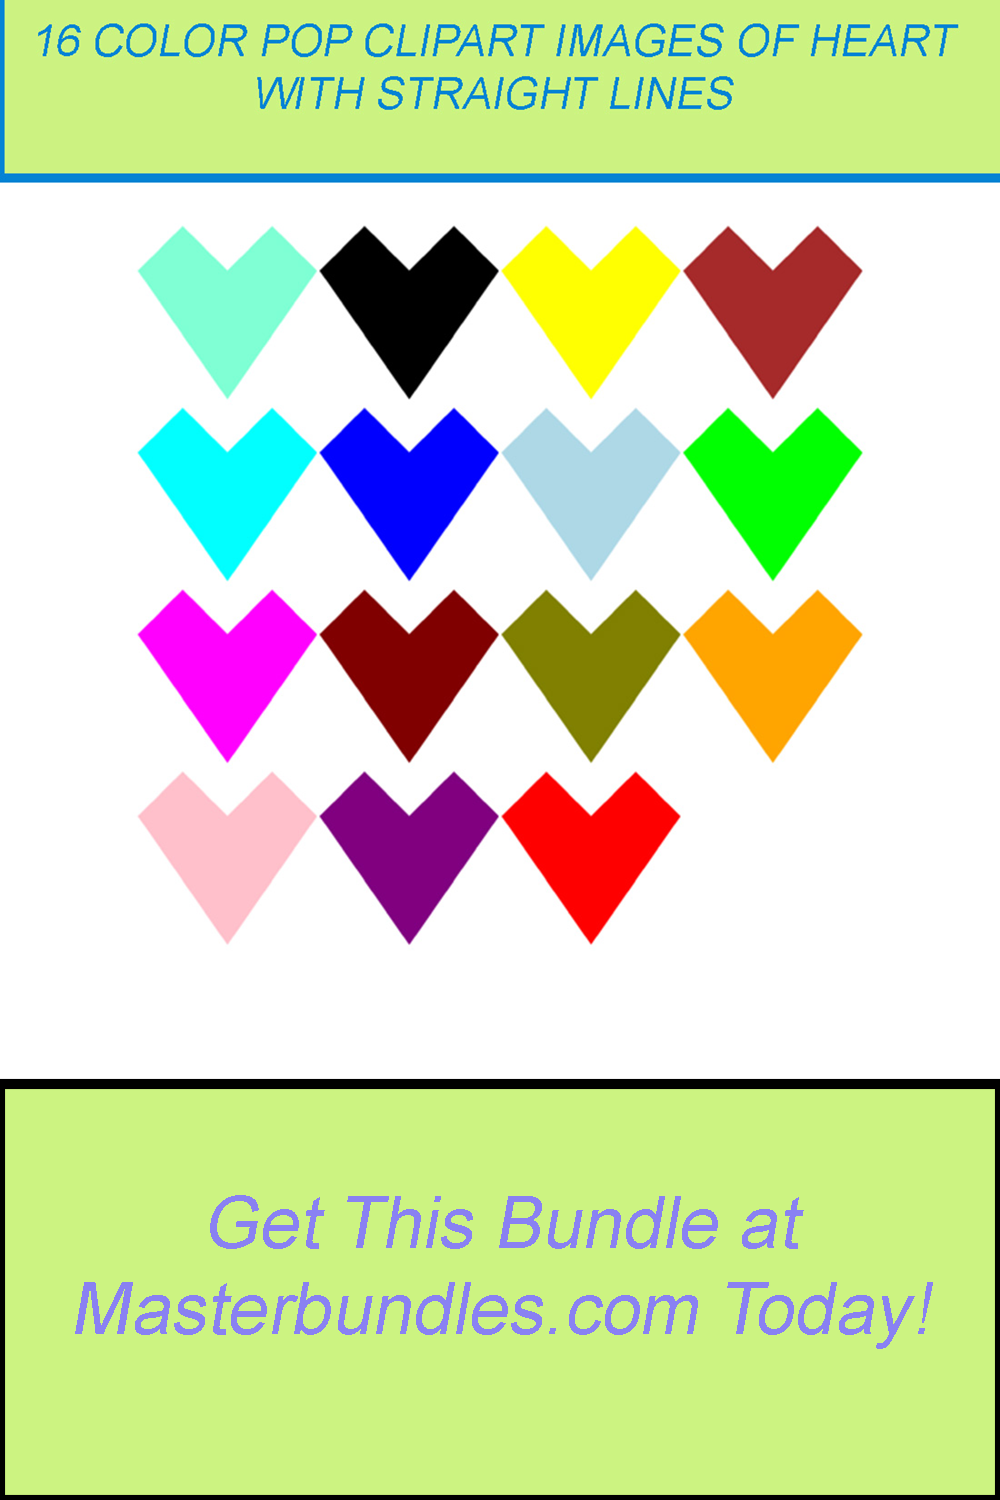 16 COLOR POP CLIPART IMAGES OF HEART STRAIGHT LINES 2 pinterest preview image.